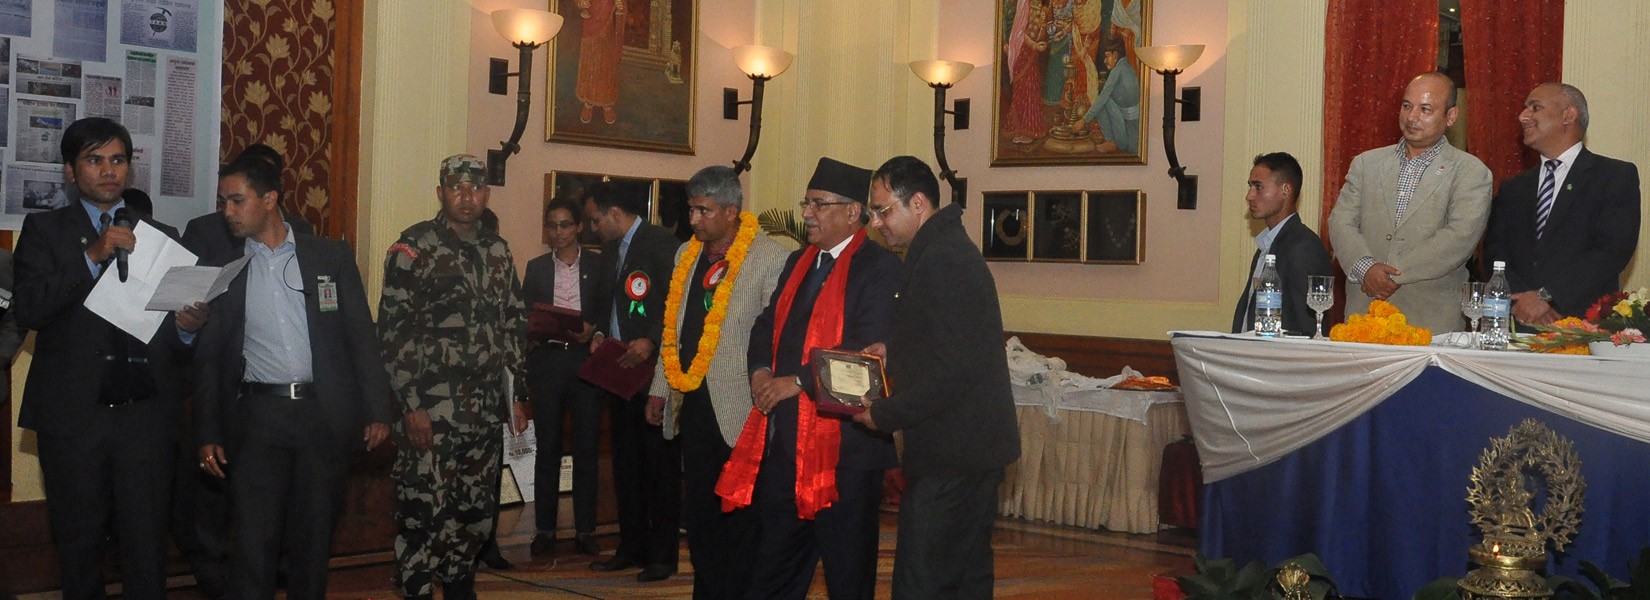 Glorious moment of receiving a prestigious award from the Prime MInister